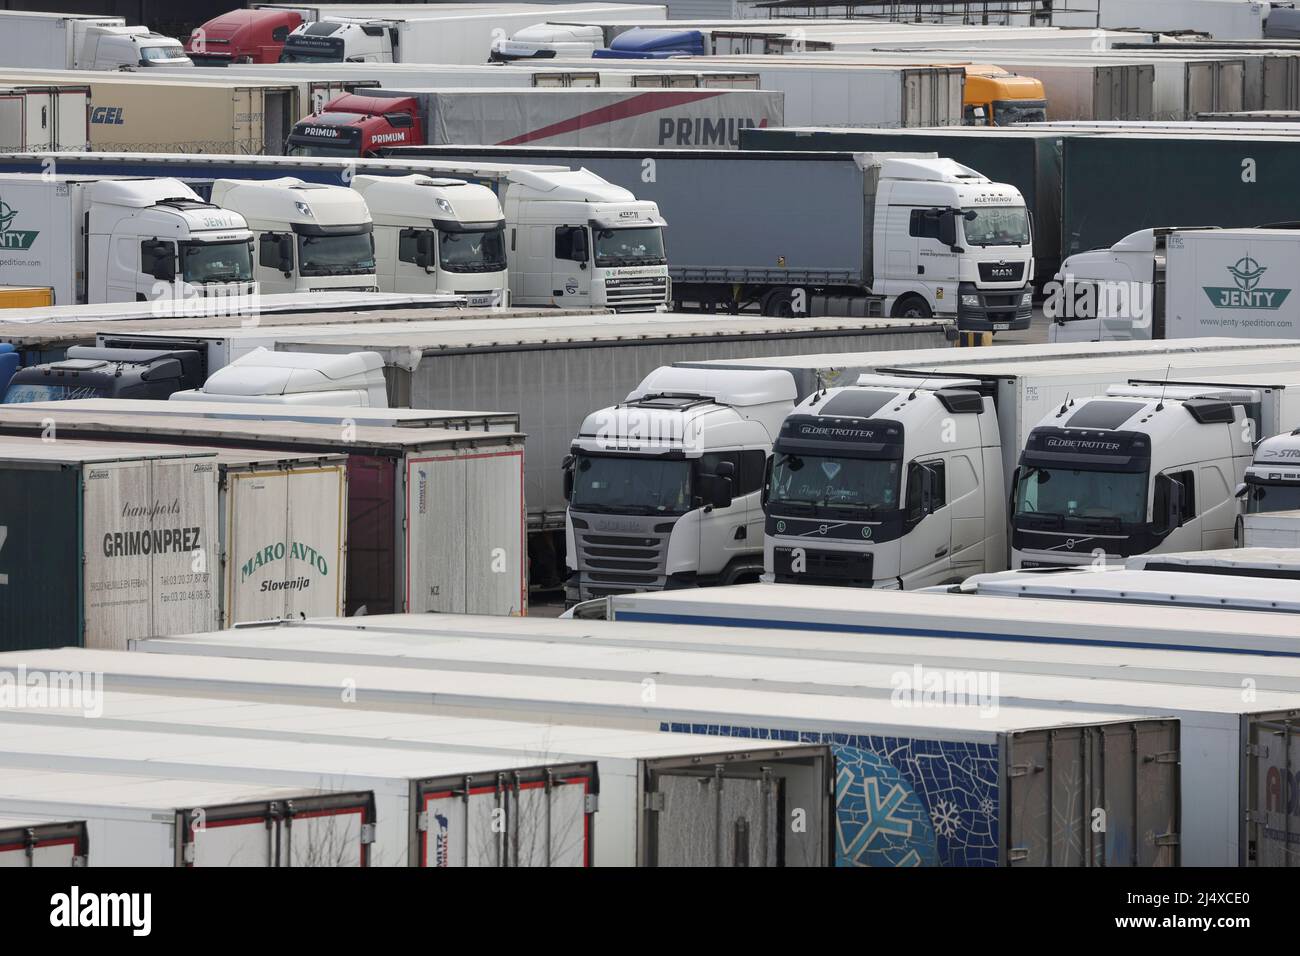 A view shows trucks and cargo vehicles at a parking area near a freight terminal in Saint Petersburg, Russia April 18, 2022. REUTERS/REUTERS PHOTOGRAPHER Stock Photo